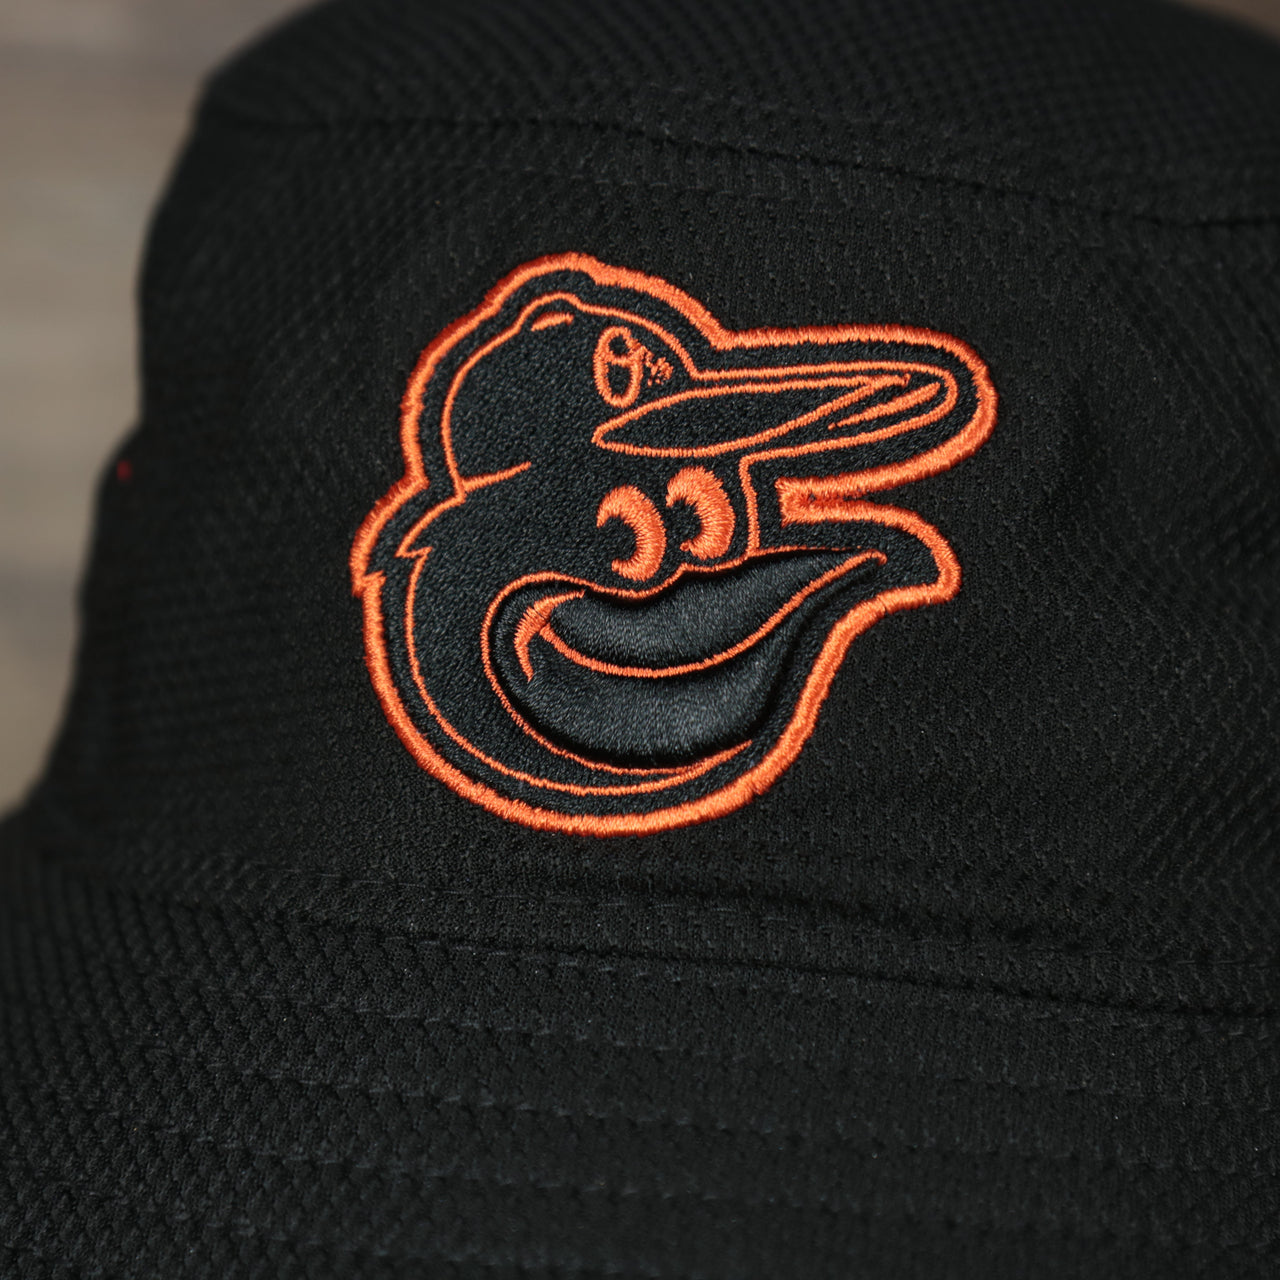 A close up of the Orioles logo on the Baltimore Orioles MLB 2022 Spring Training Onfield Bucket Hat